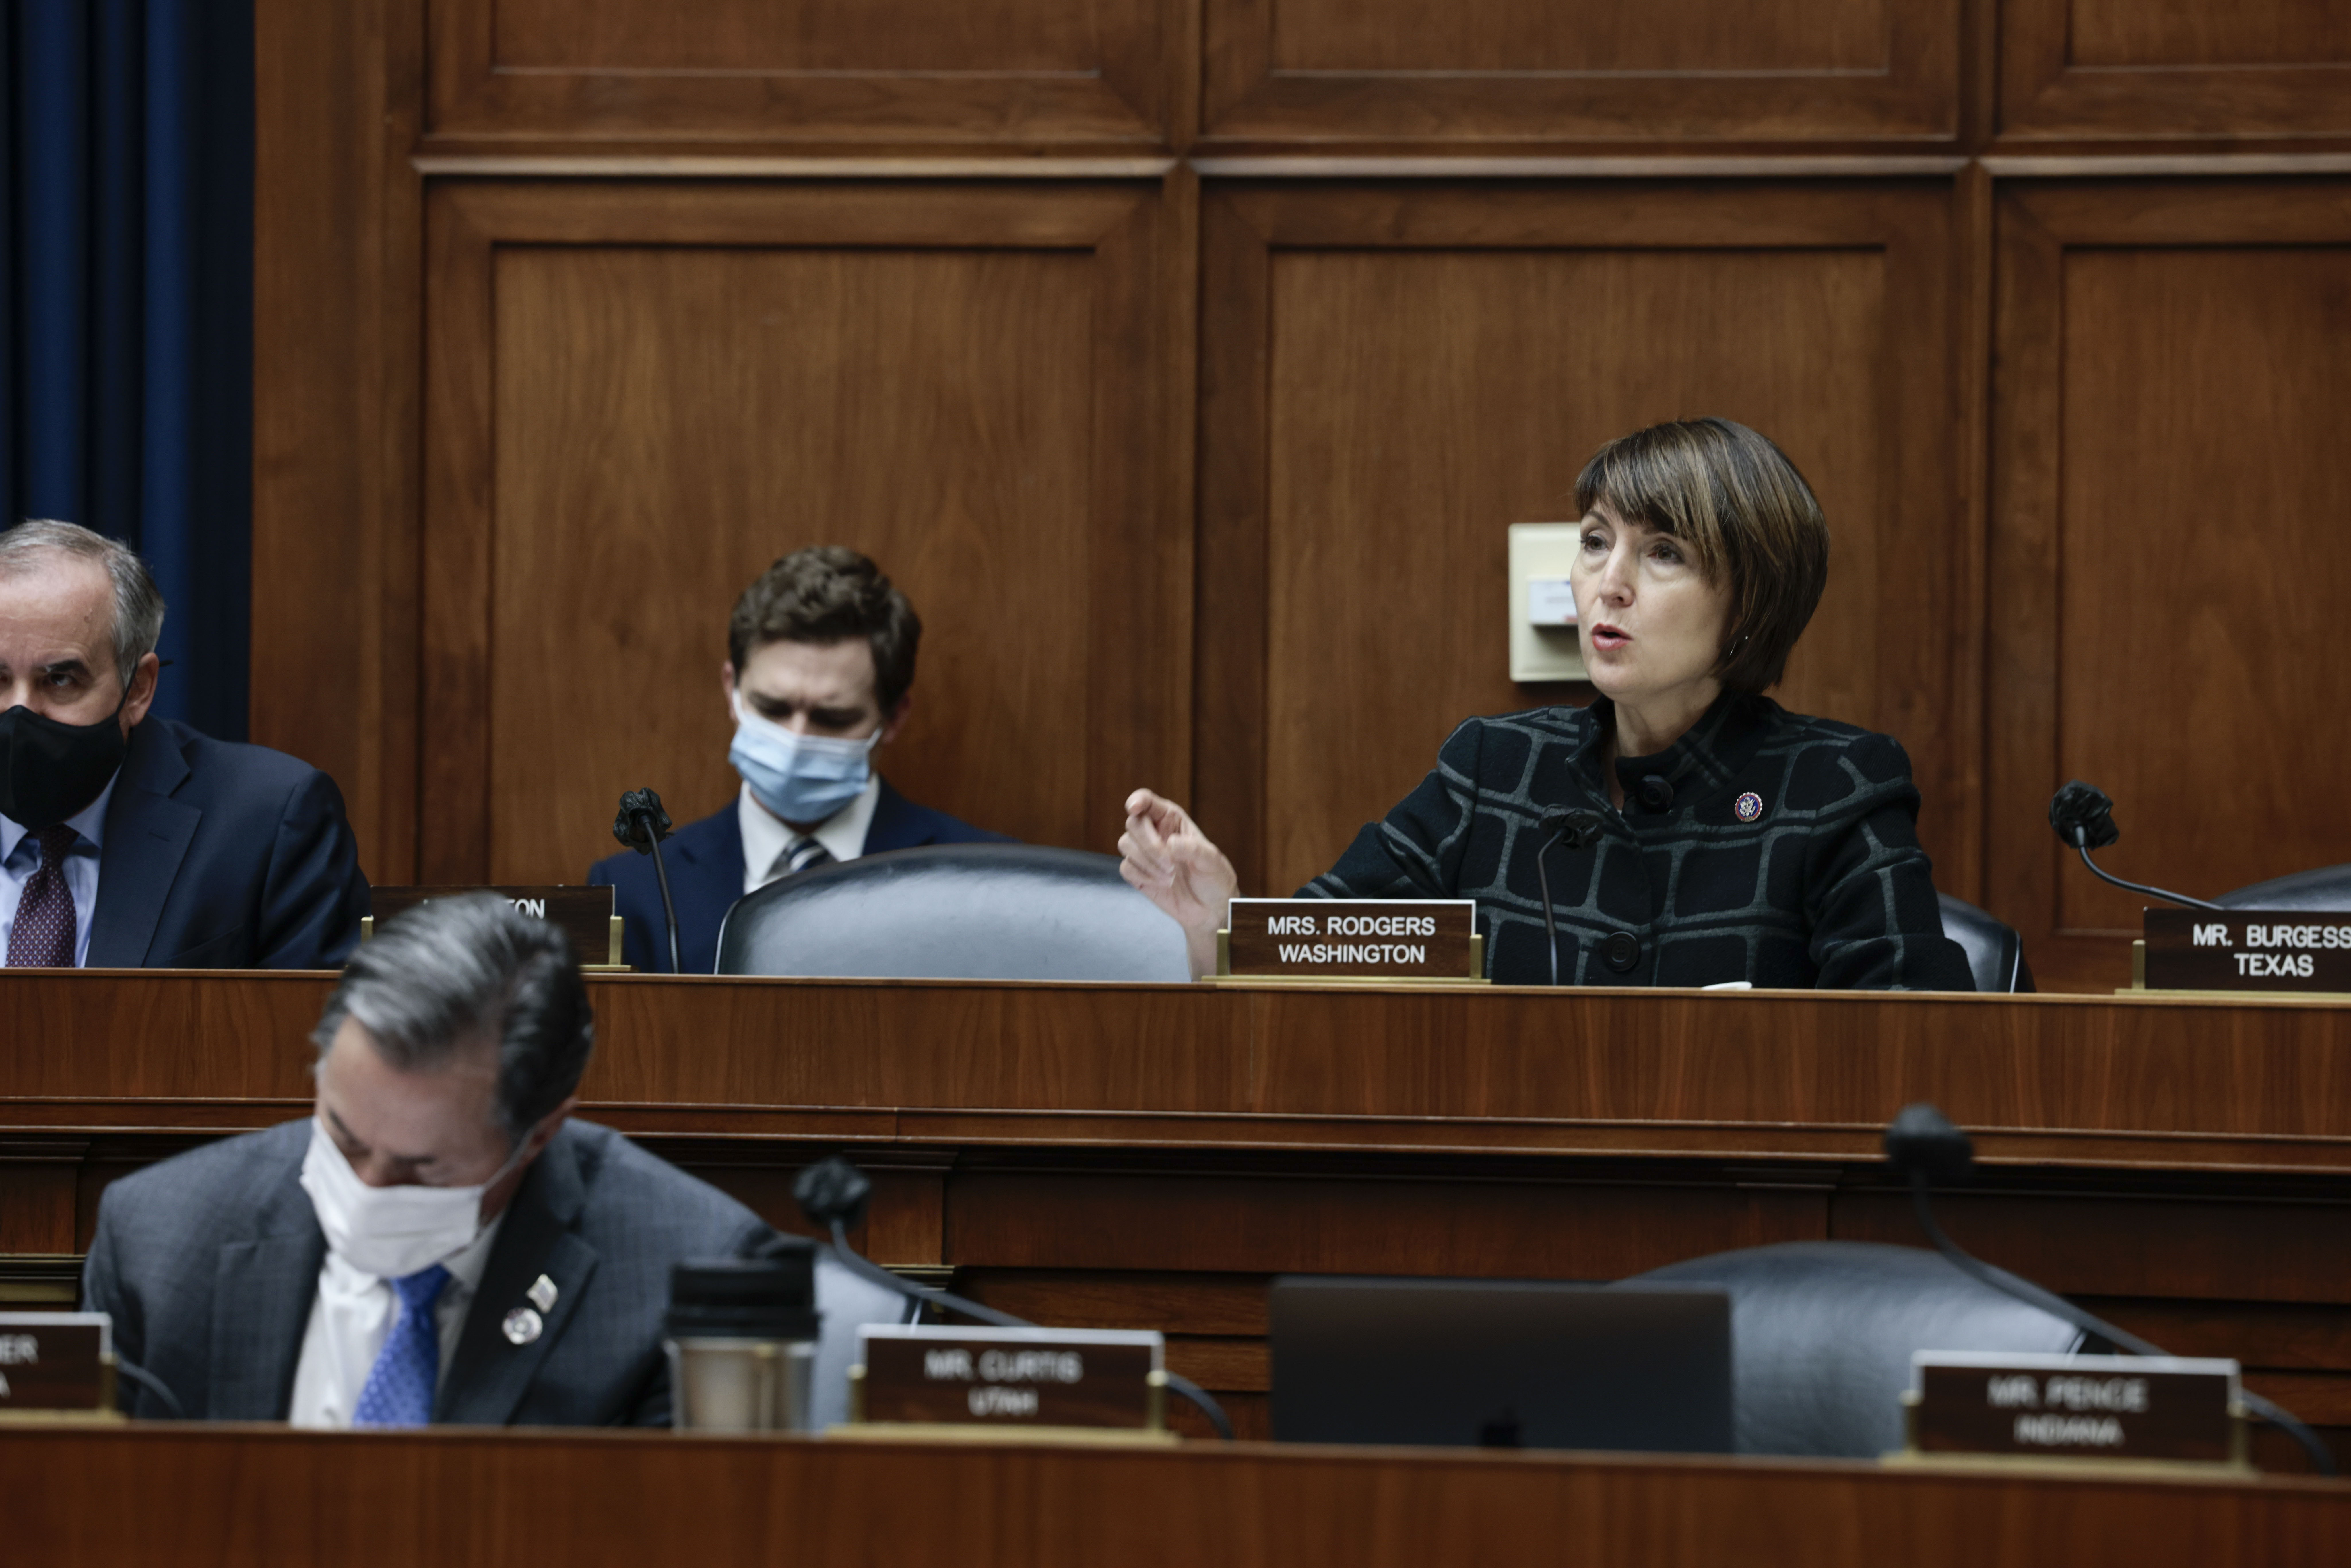 Republican Rep. Cathy McMorris Rodgers speaks at a hearing on Nov. 16 in Washington, D.C. (Anna Moneymaker/Getty Images)